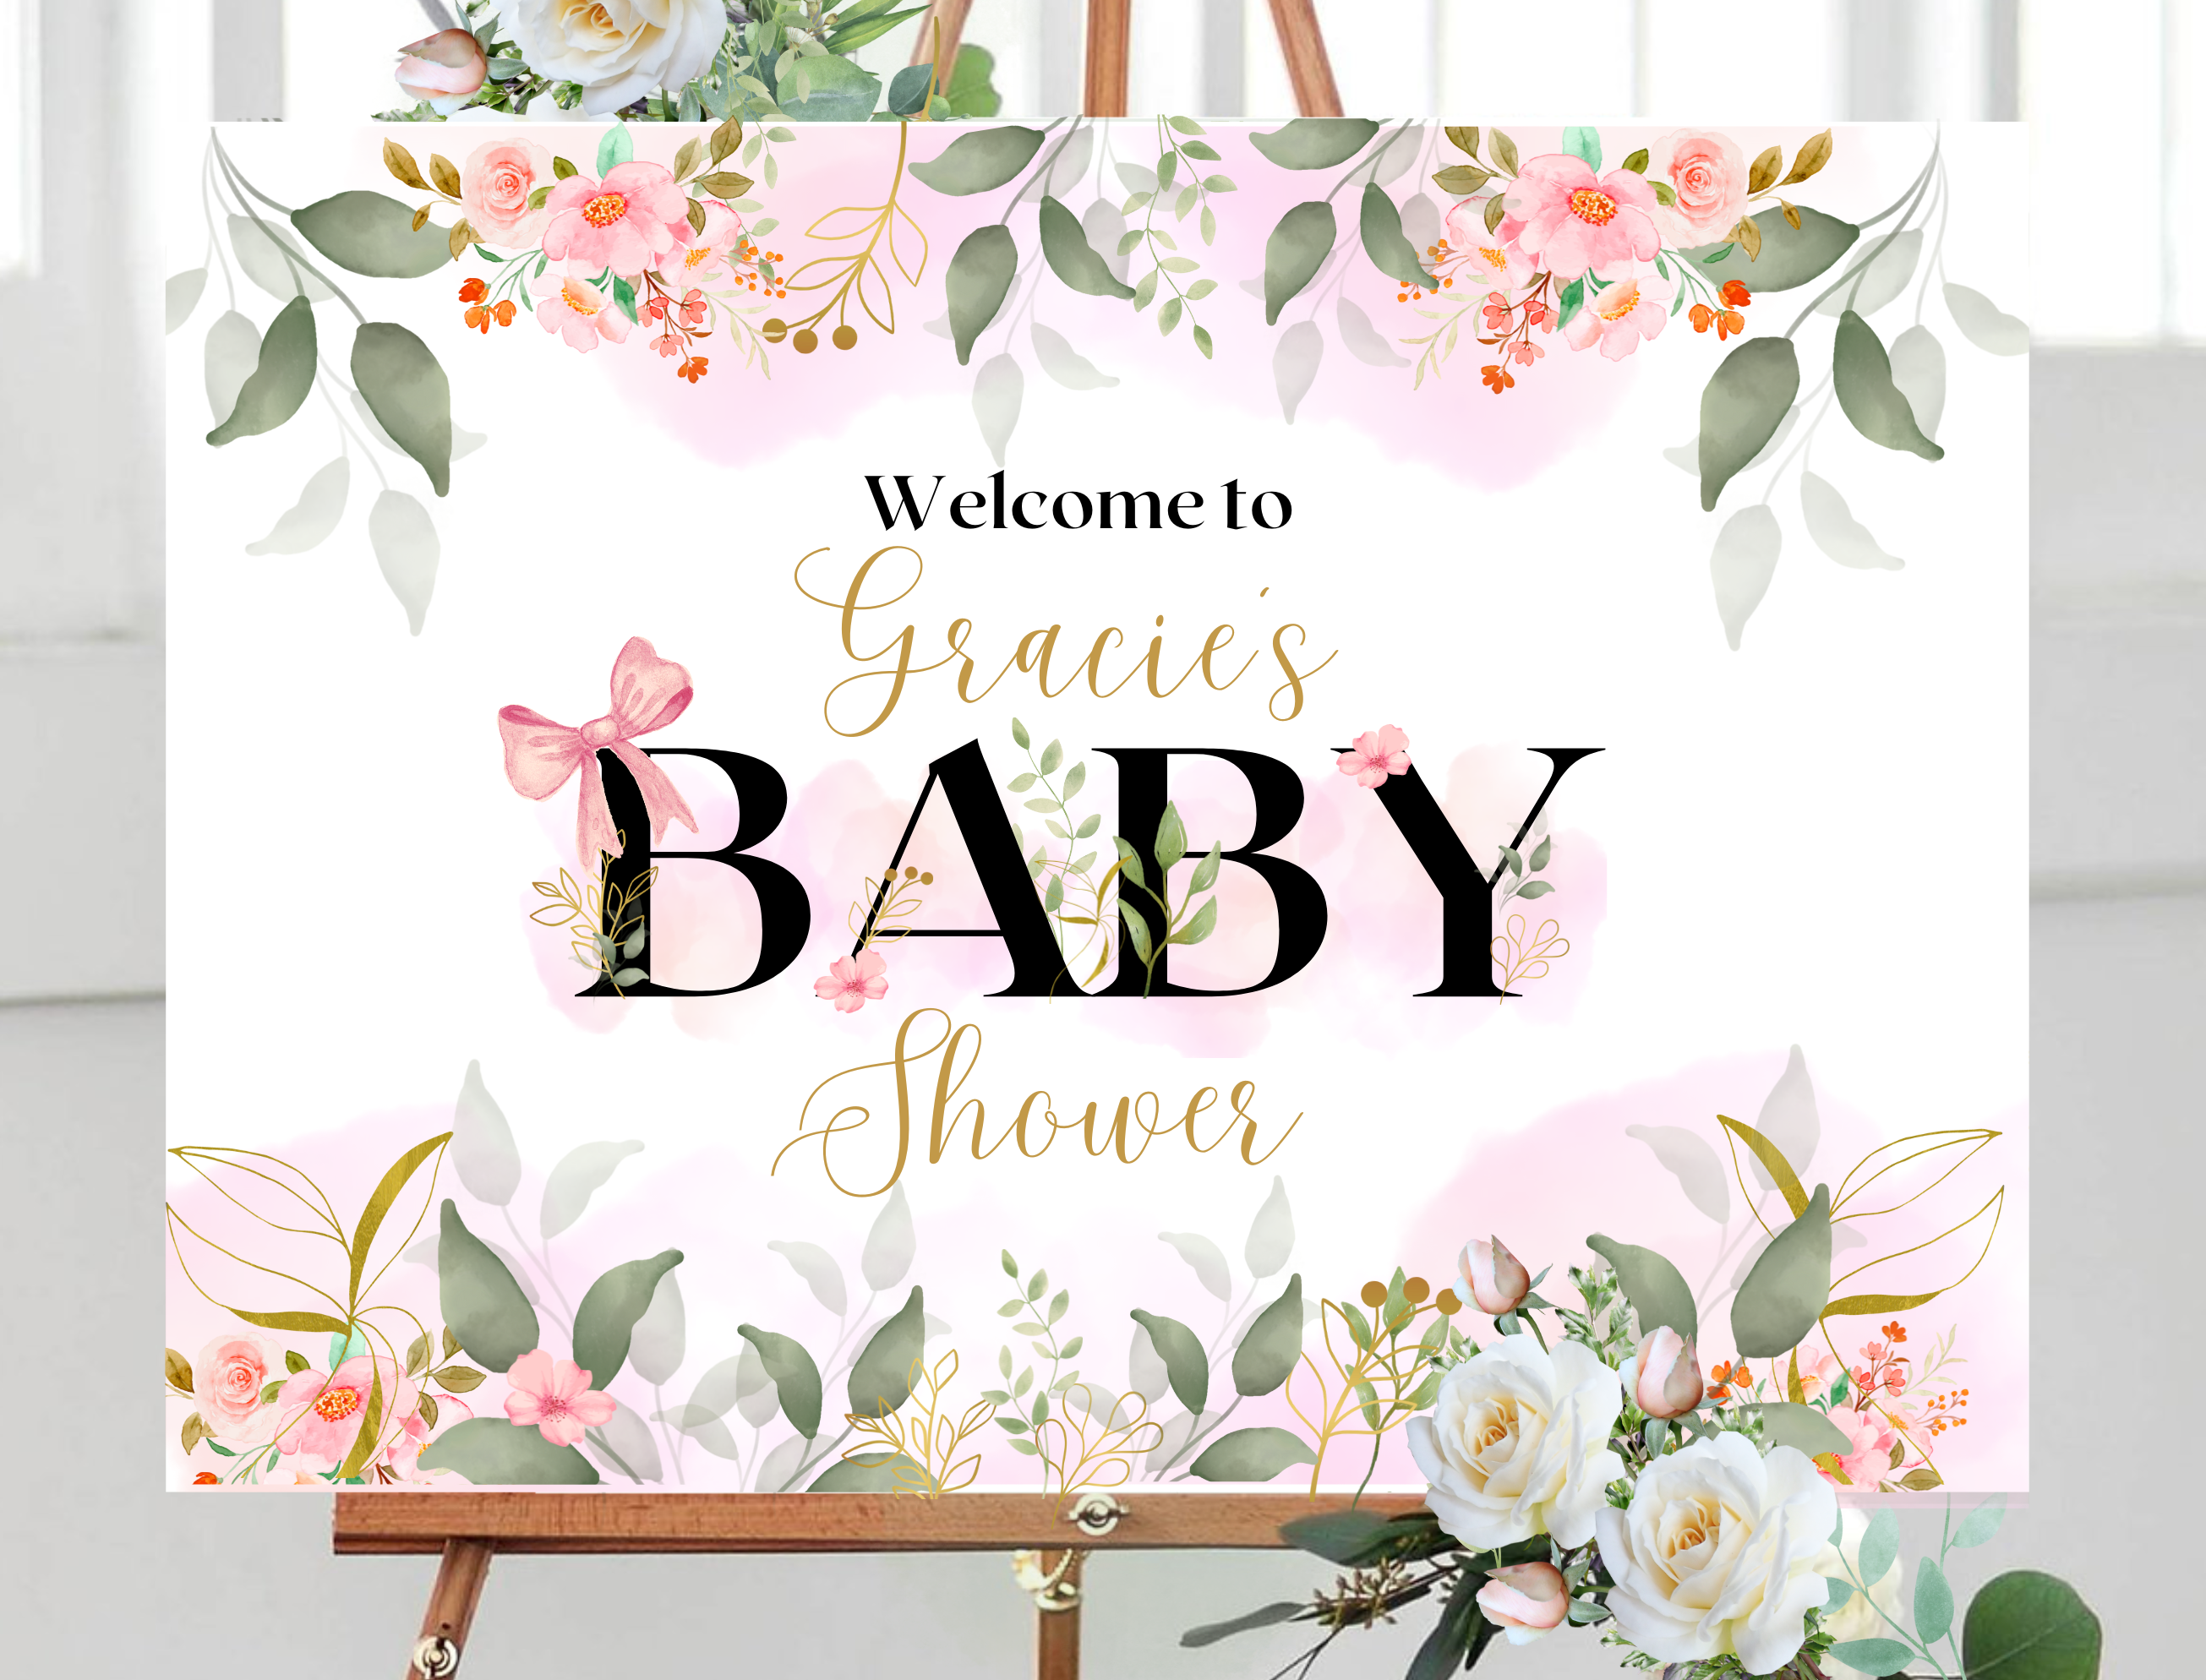 Baby Shower Sign | Emily